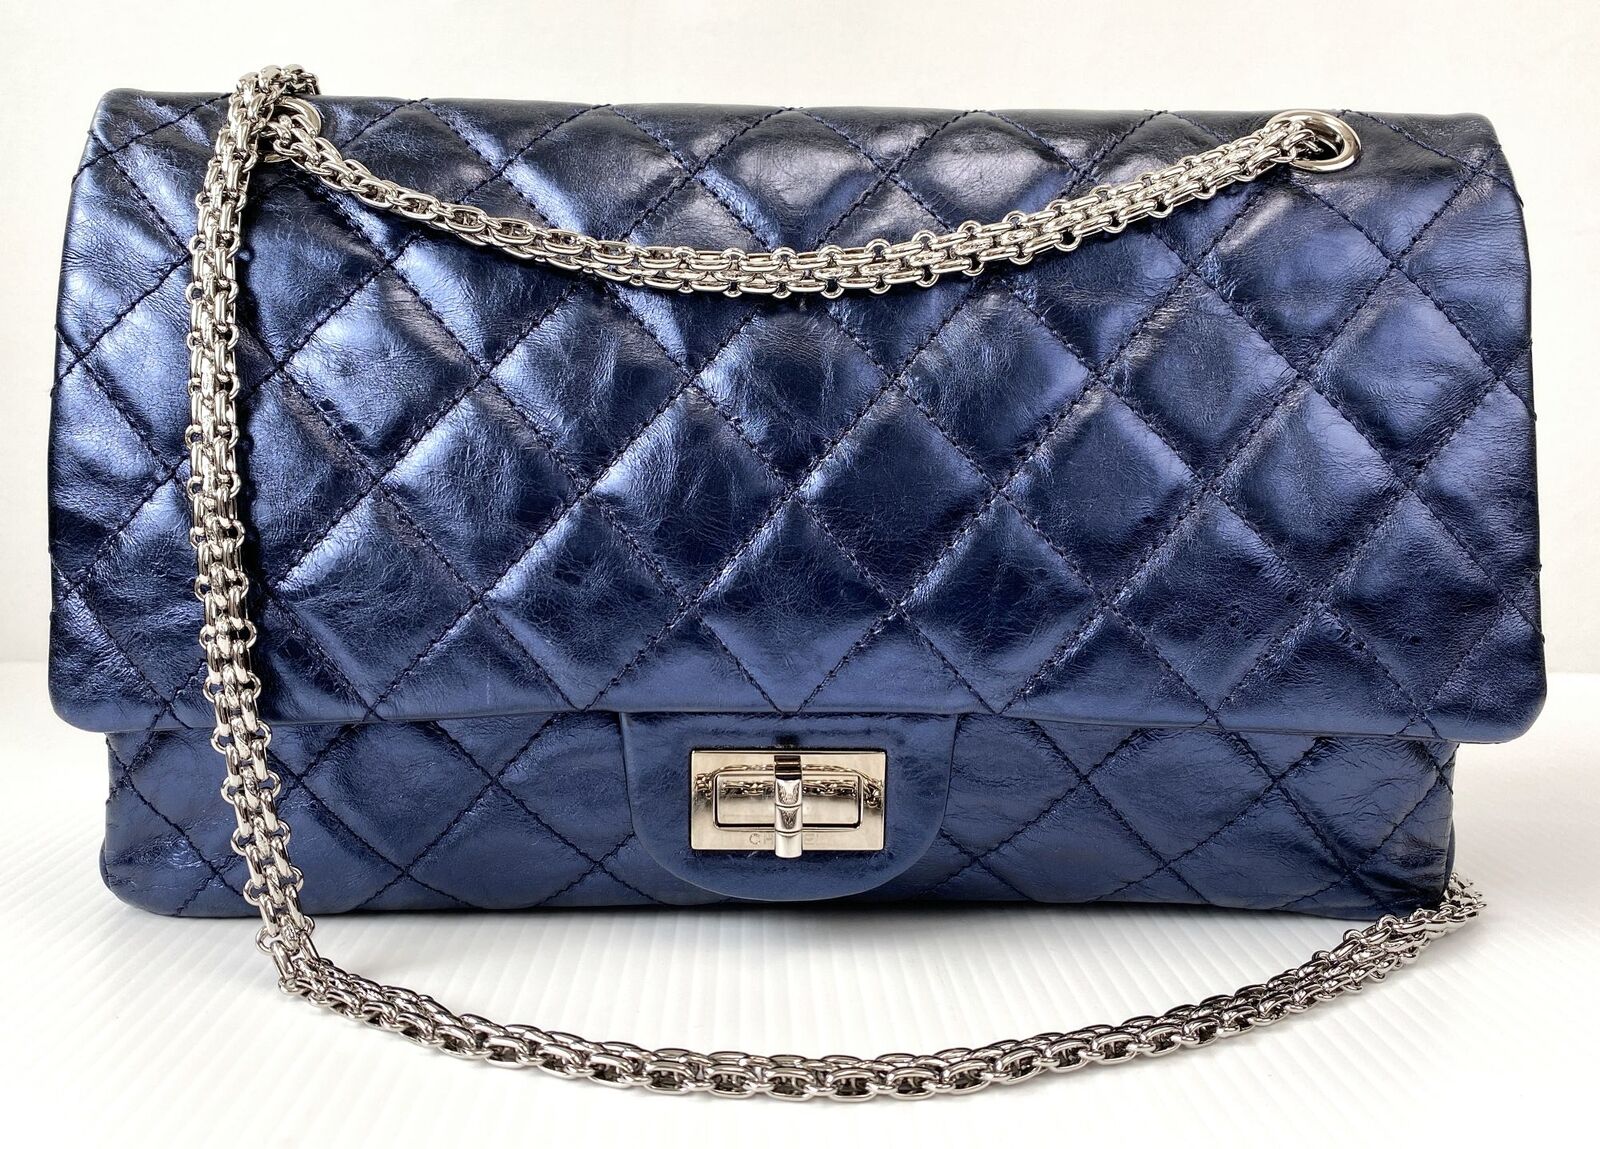 CHANEL Metallic Blue Quilted Leather Maxi Reissue 2.55 Classic 227 Flap Bag